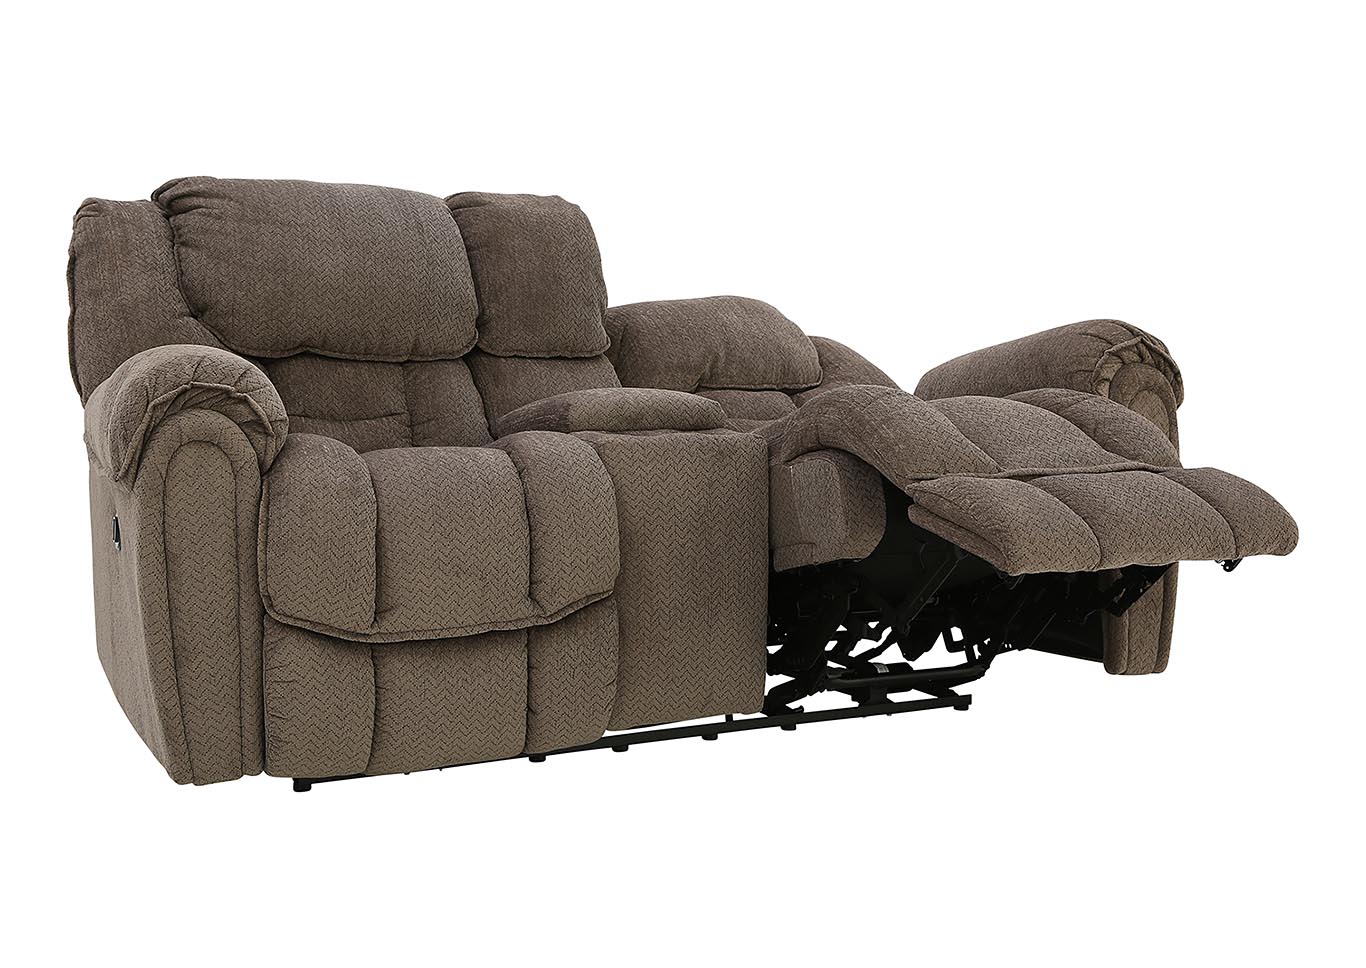 BAXTER TAUPE 1P POWER LOVESEAT WITH CONSOLE,HOMESTRETCH